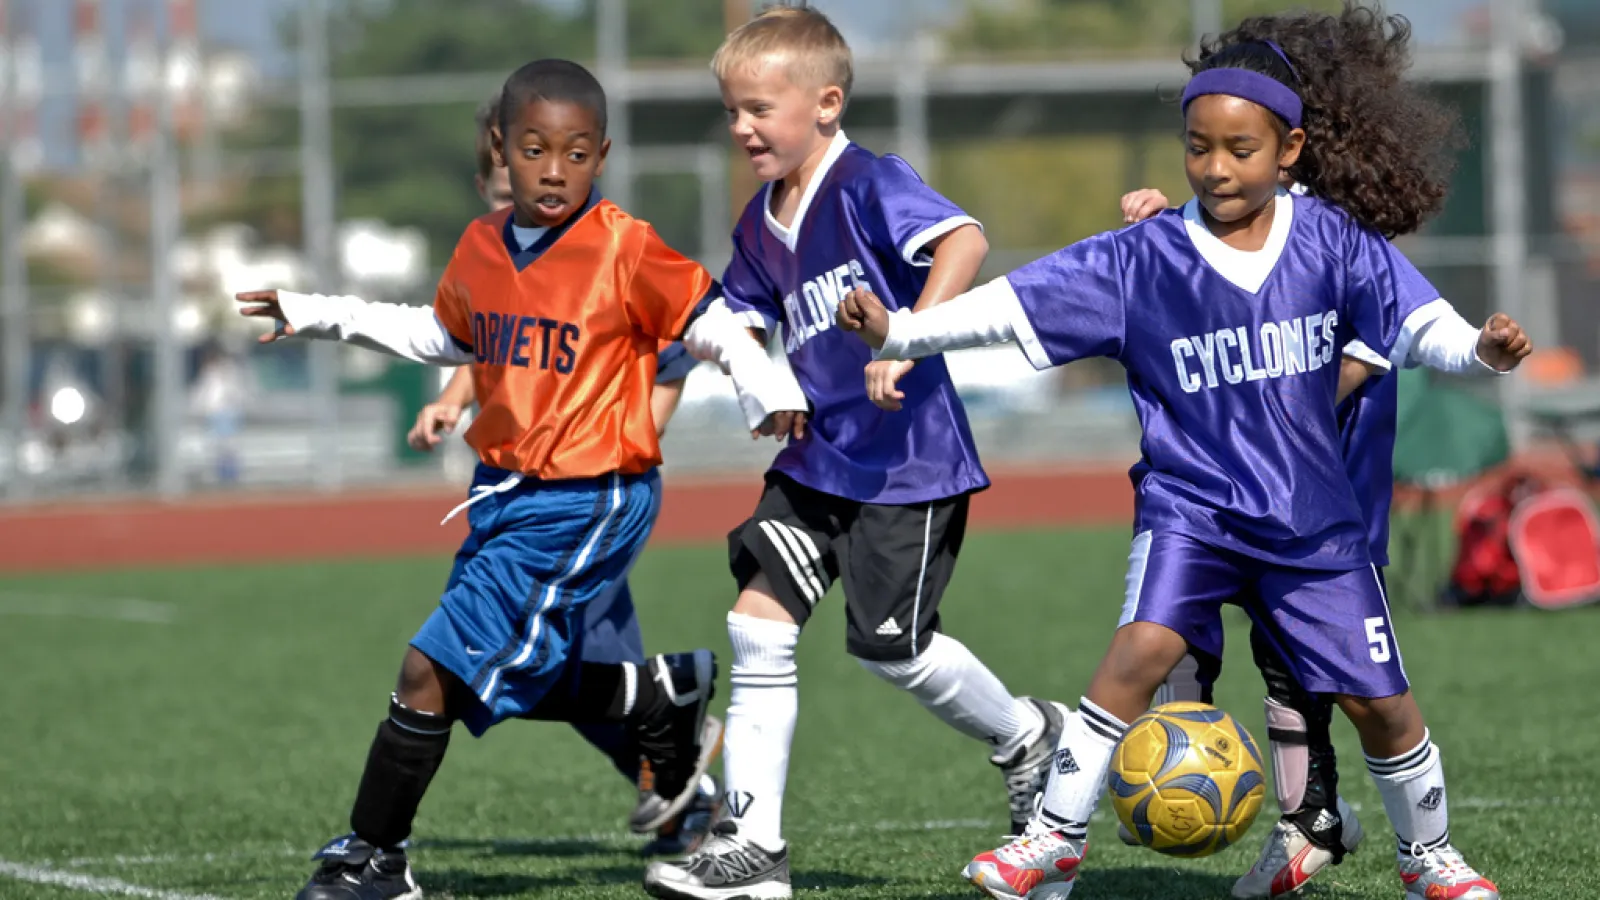 Kids In Sports? 6 Ways to Save Money on Equipment, Travel, Involvement, And More 